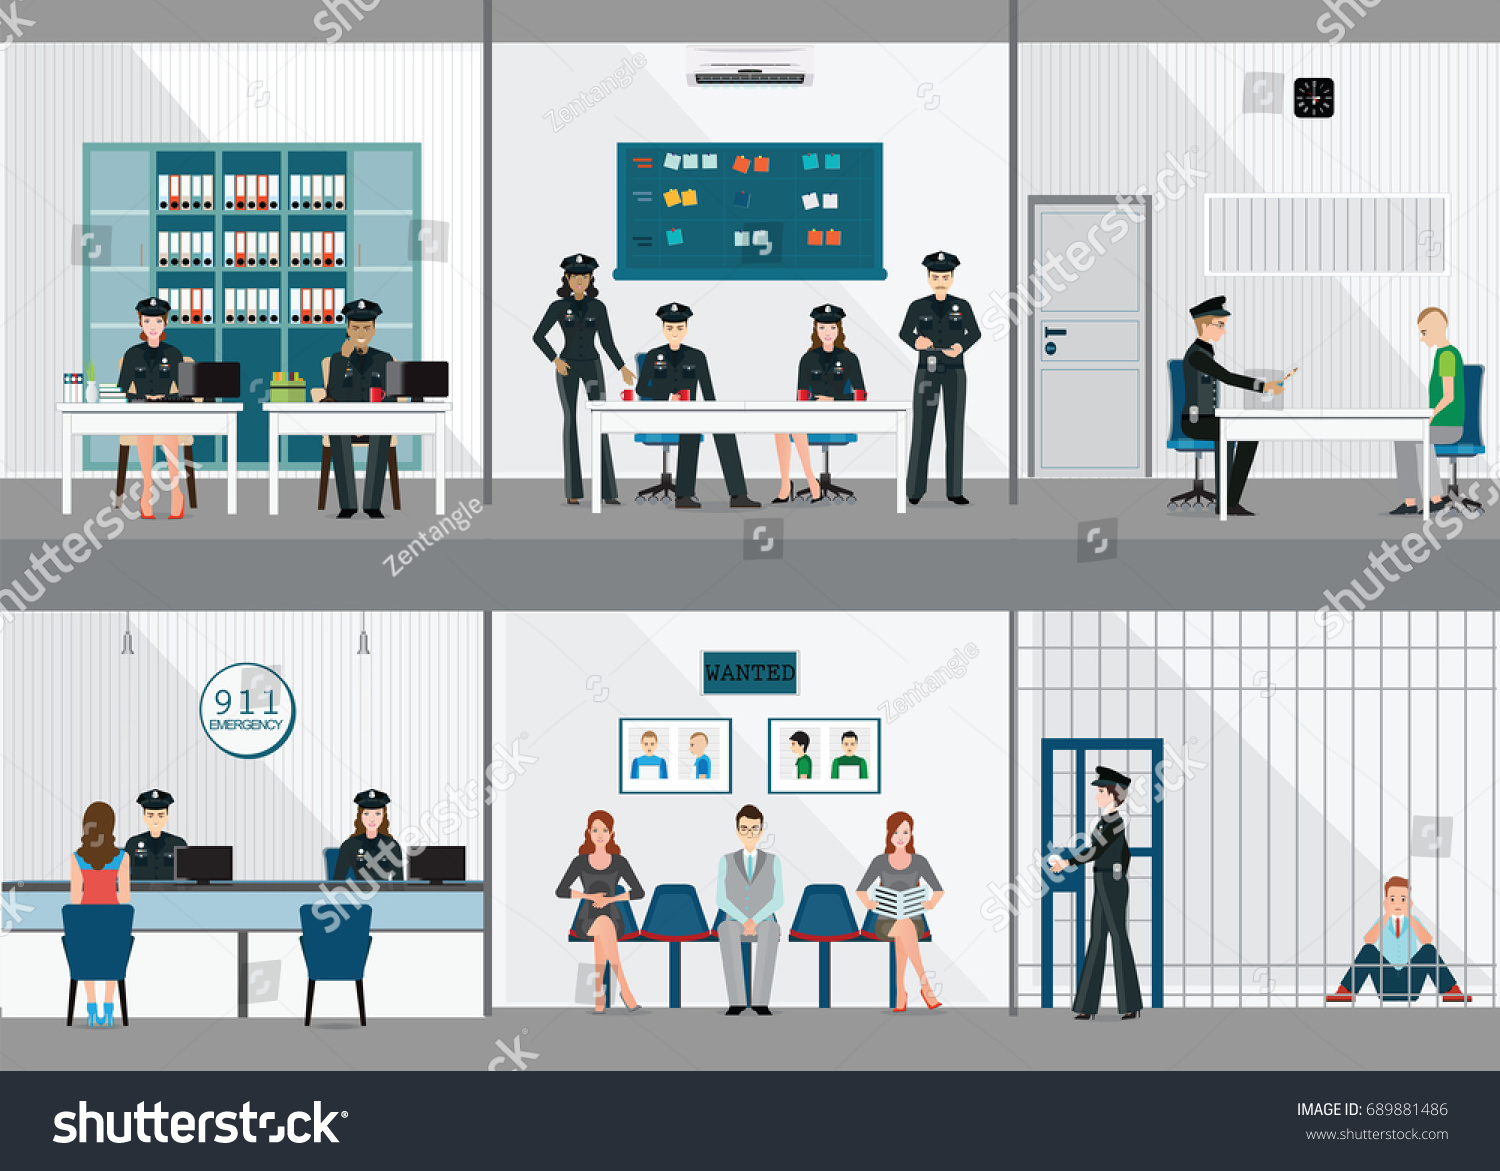 Police Station Interior Set Office Room Stock Vector